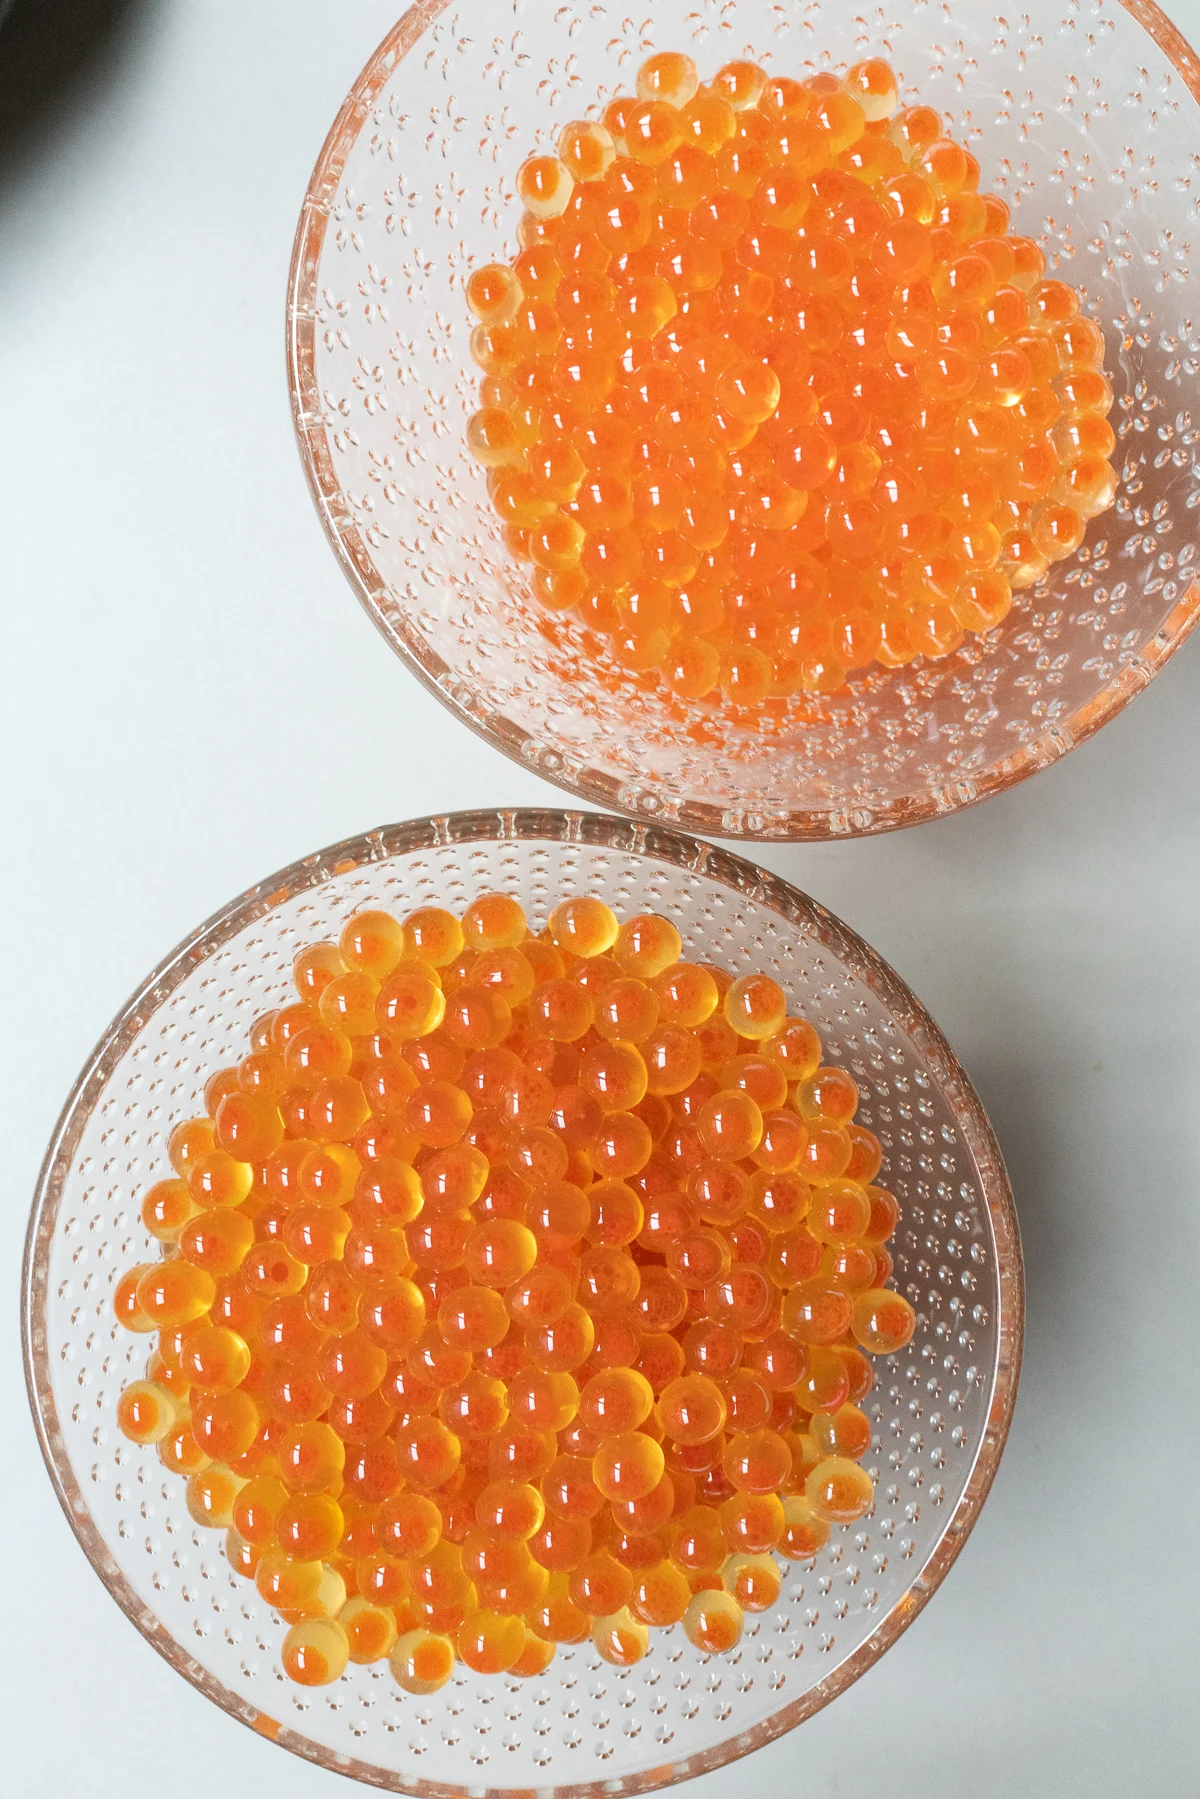 Two small glass bowls, one with salt-cured salmon roe, another with soy sauce-cured salmon roe.